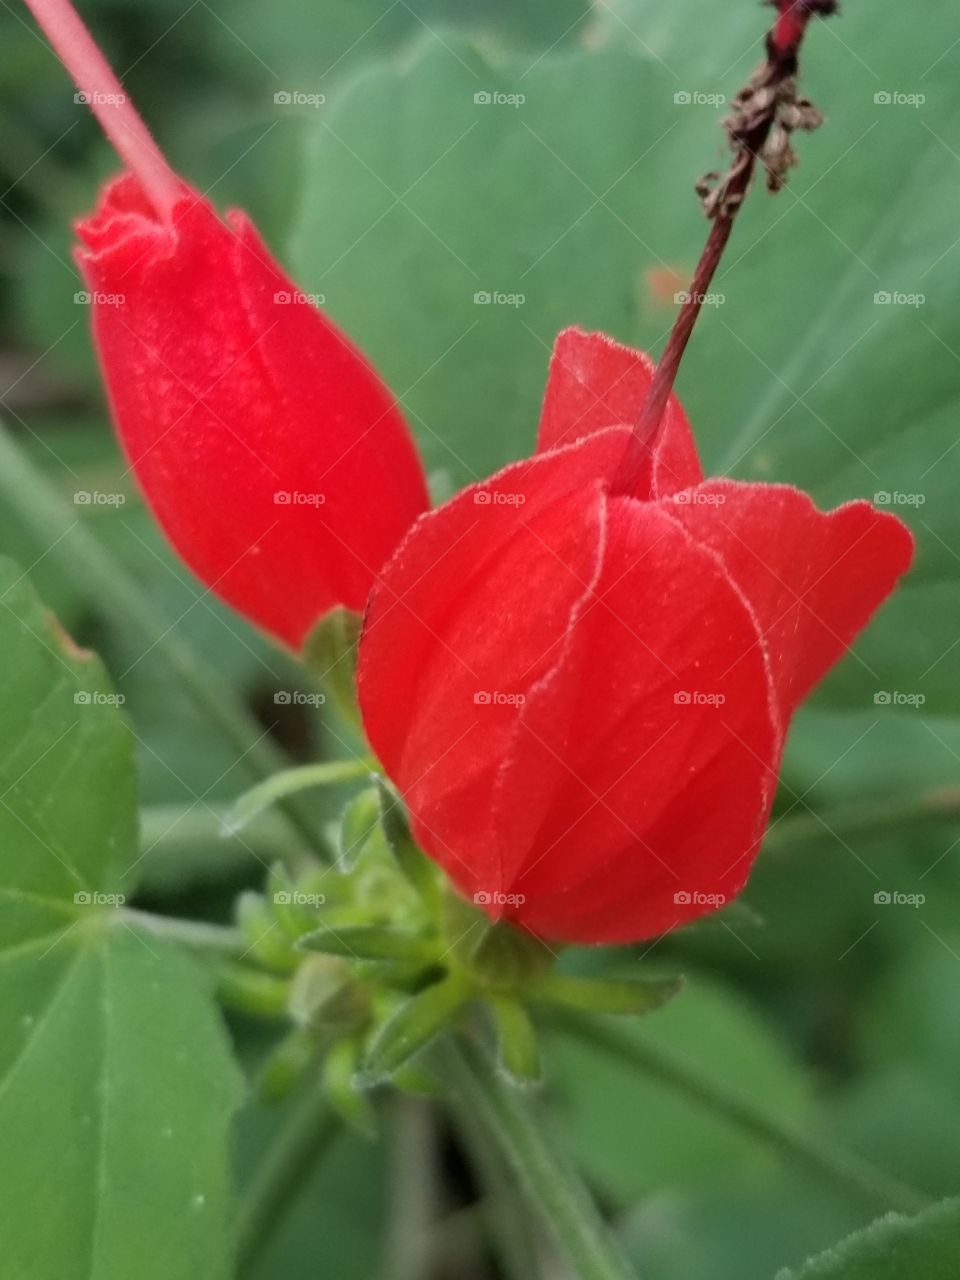 Red flowers